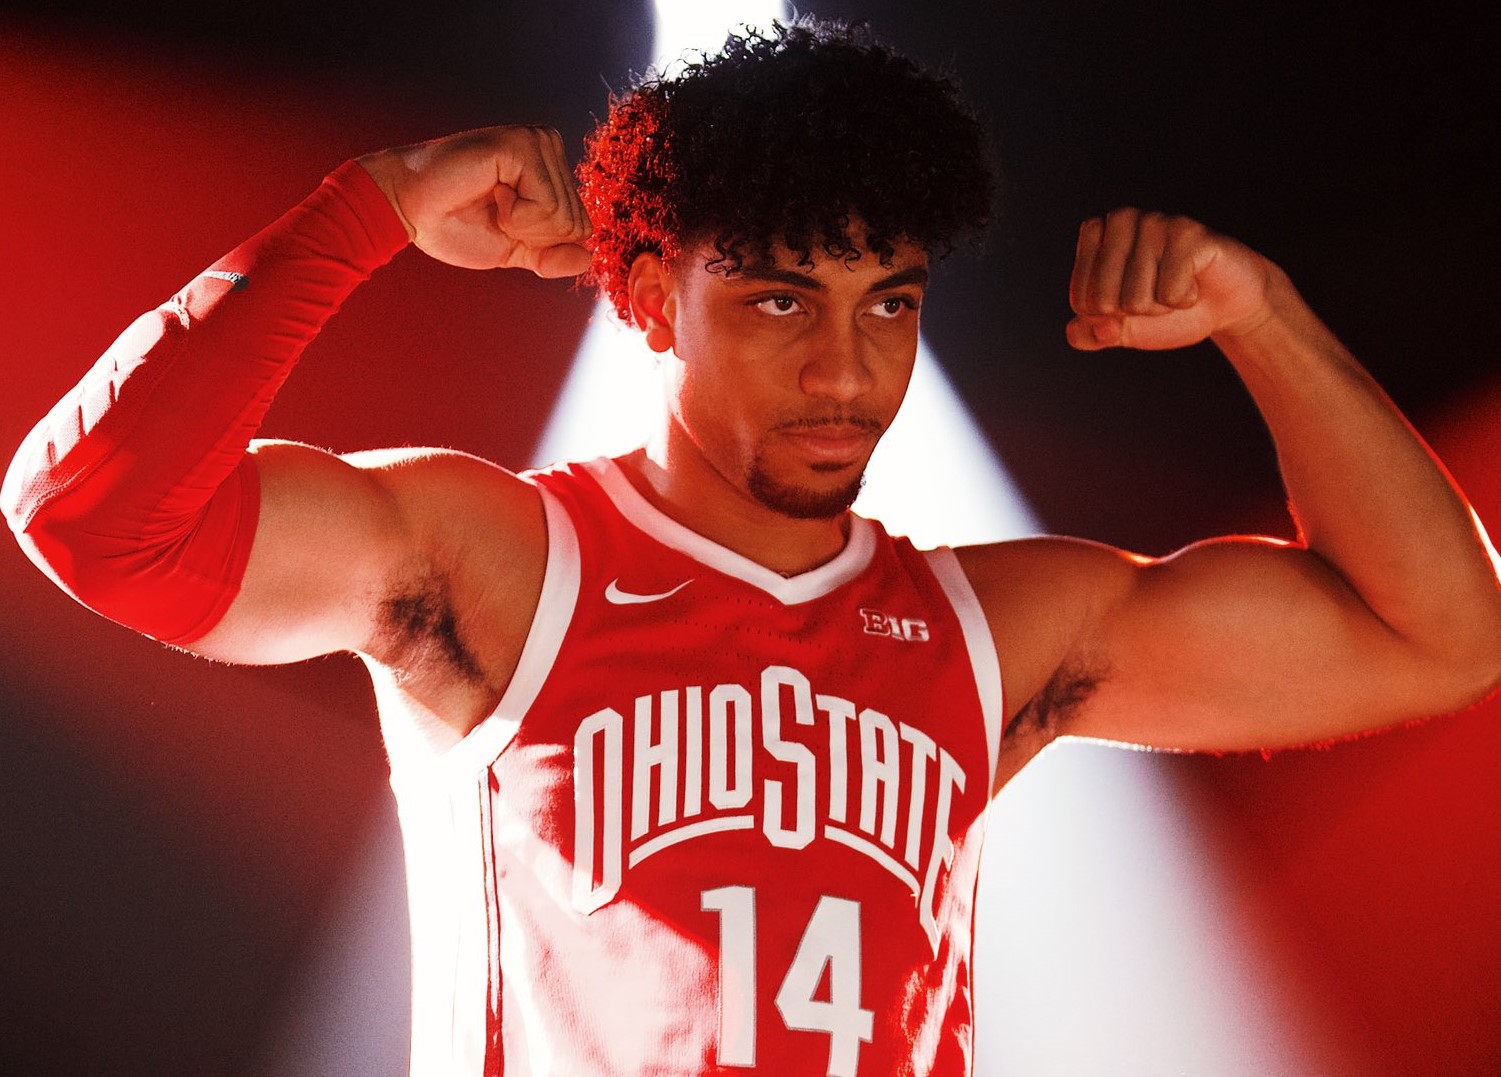 Splashes, Dunks & Dimes - The Top 5 B1G Small Forwards